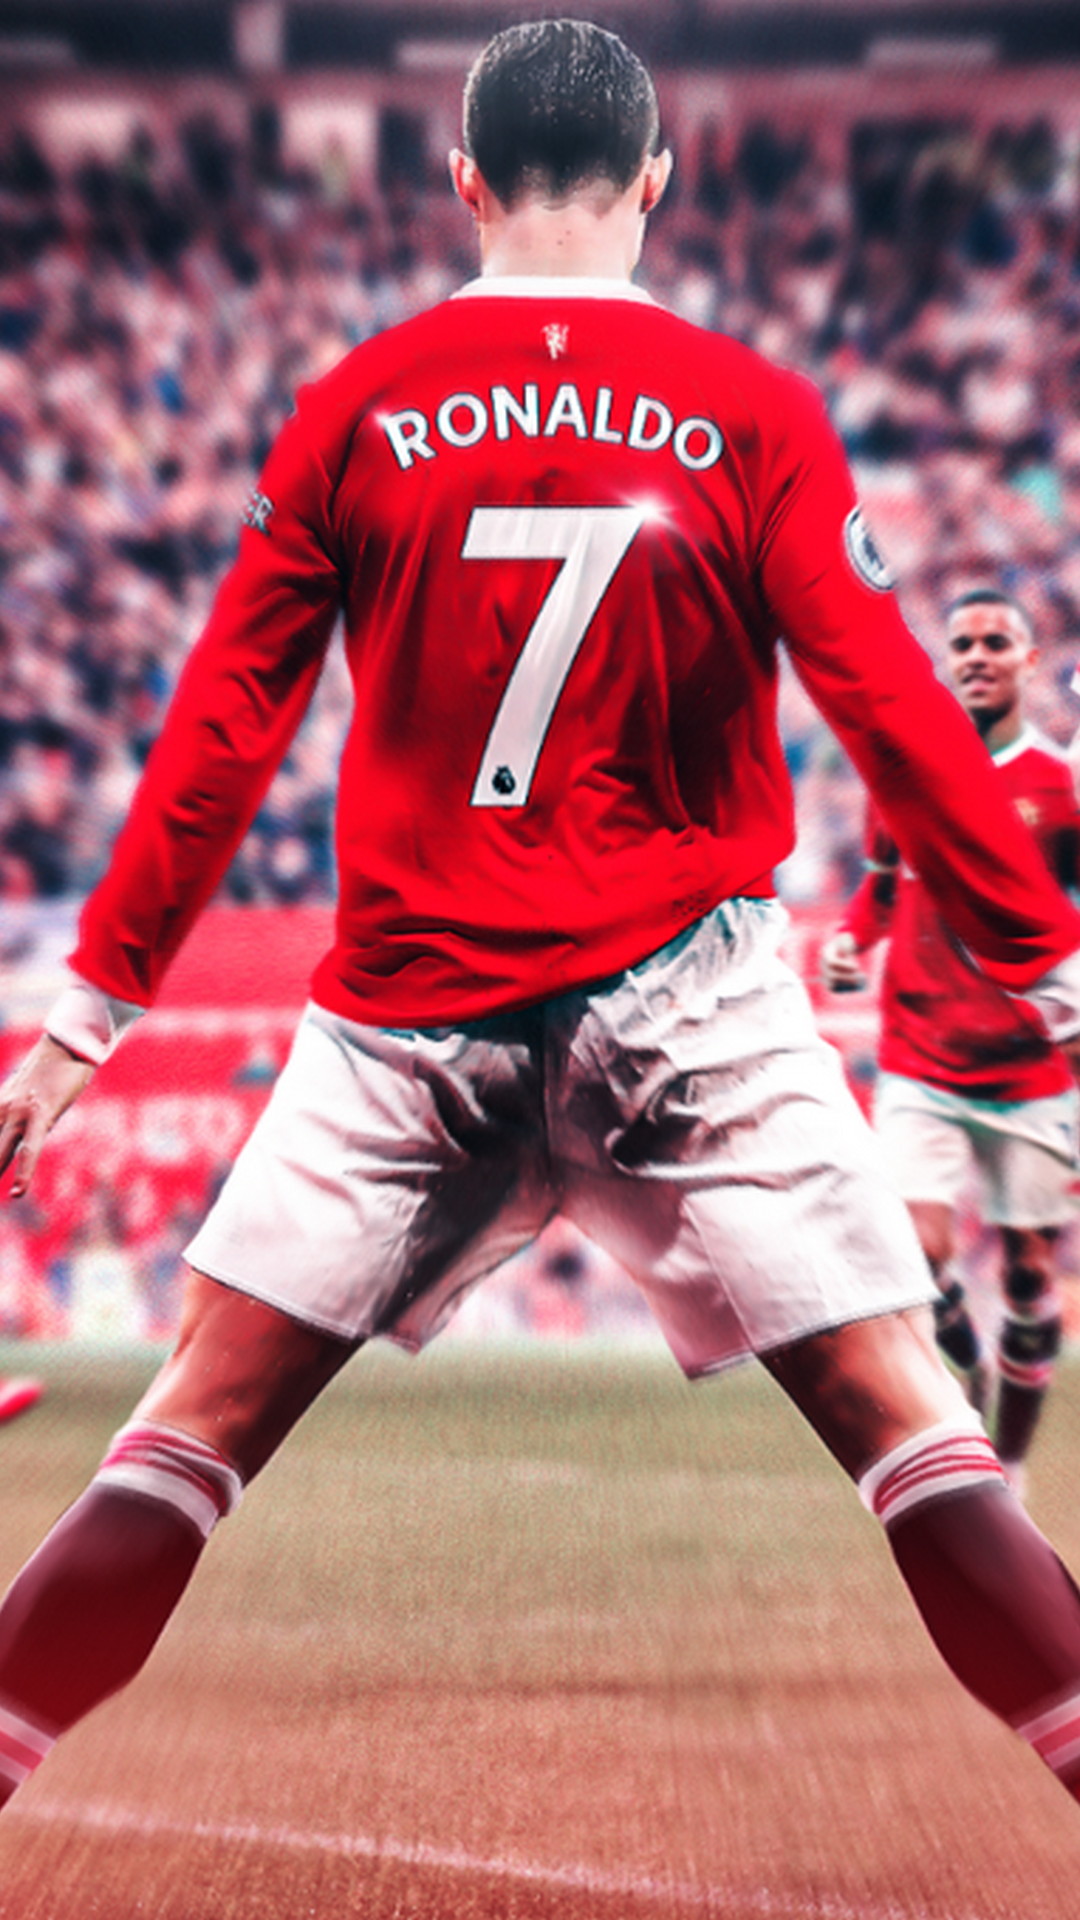 Cristiano Ronaldo Manchester United iPhone Wallpapers with high-resolution 1080x1920 pixel. You can use this wallpaper for your Desktop Computers, Mac Screensavers, Windows Backgrounds, iPhone Wallpapers, Tablet or Android Lock screen and another Mobile device